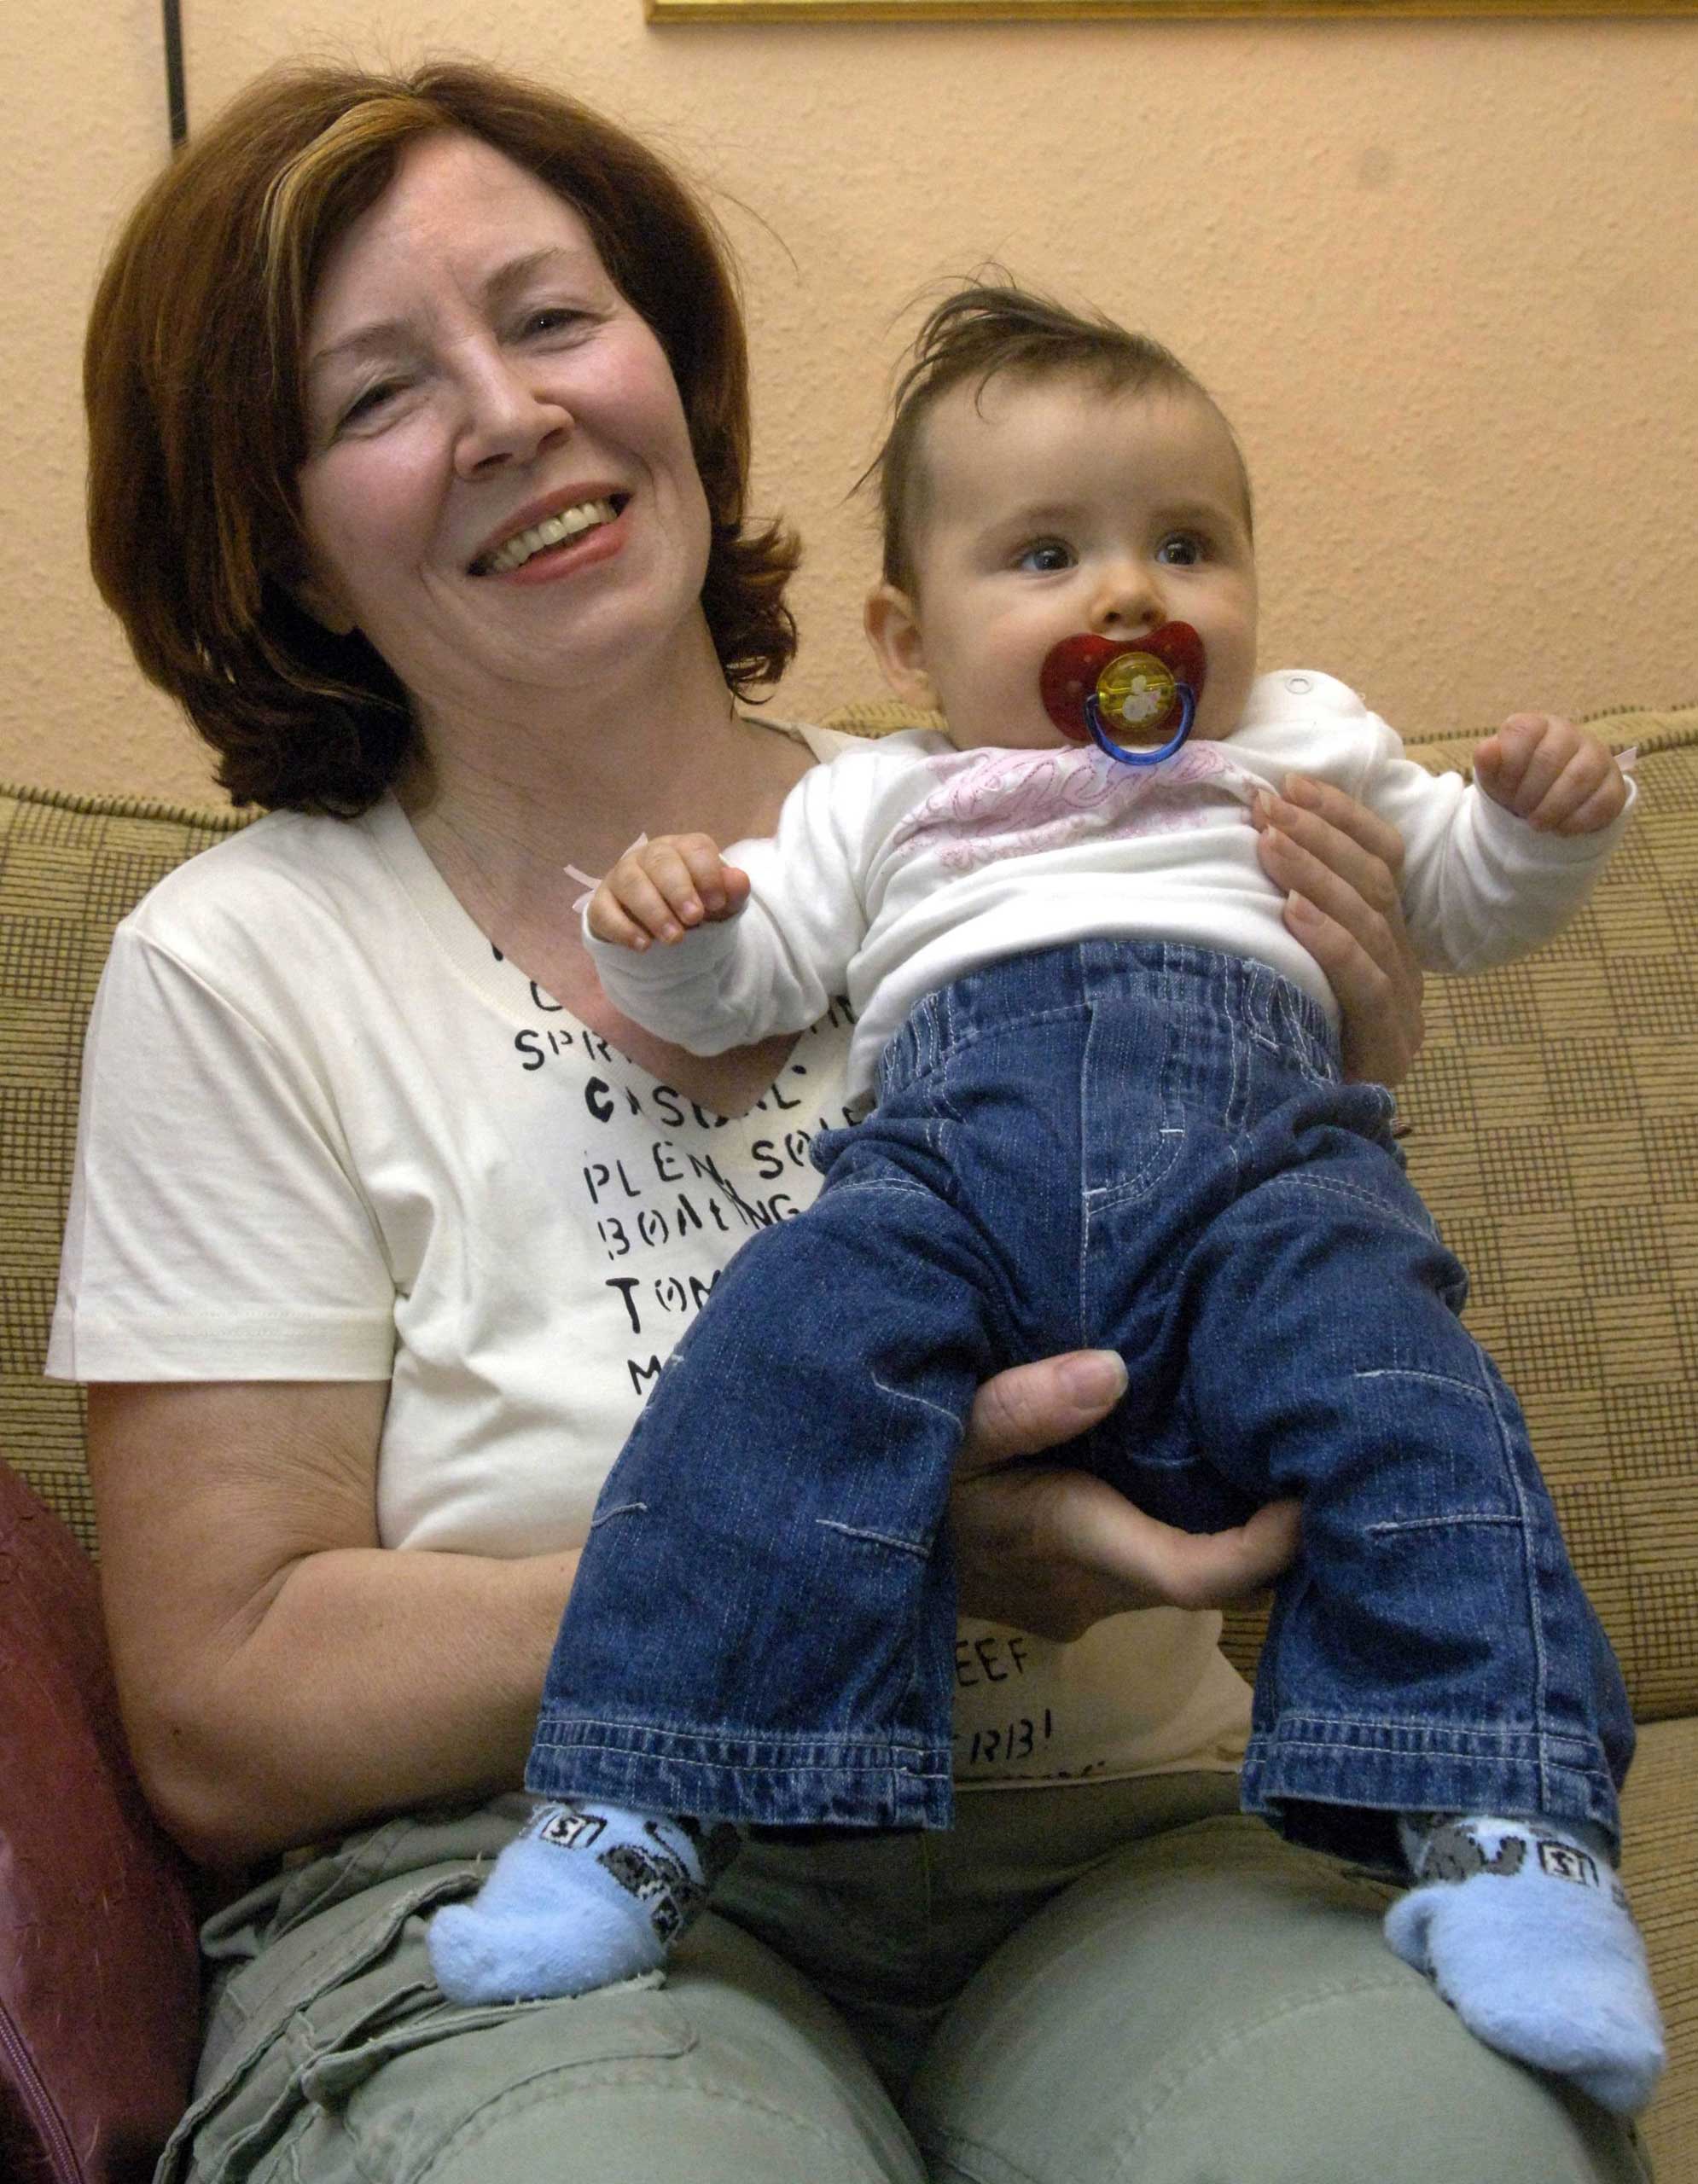 Annegret Raunigk, then 55-years-old, poses with her daughter Leila in Berlin on Nov. 3, 2005. (Patrick Lux—EPA)